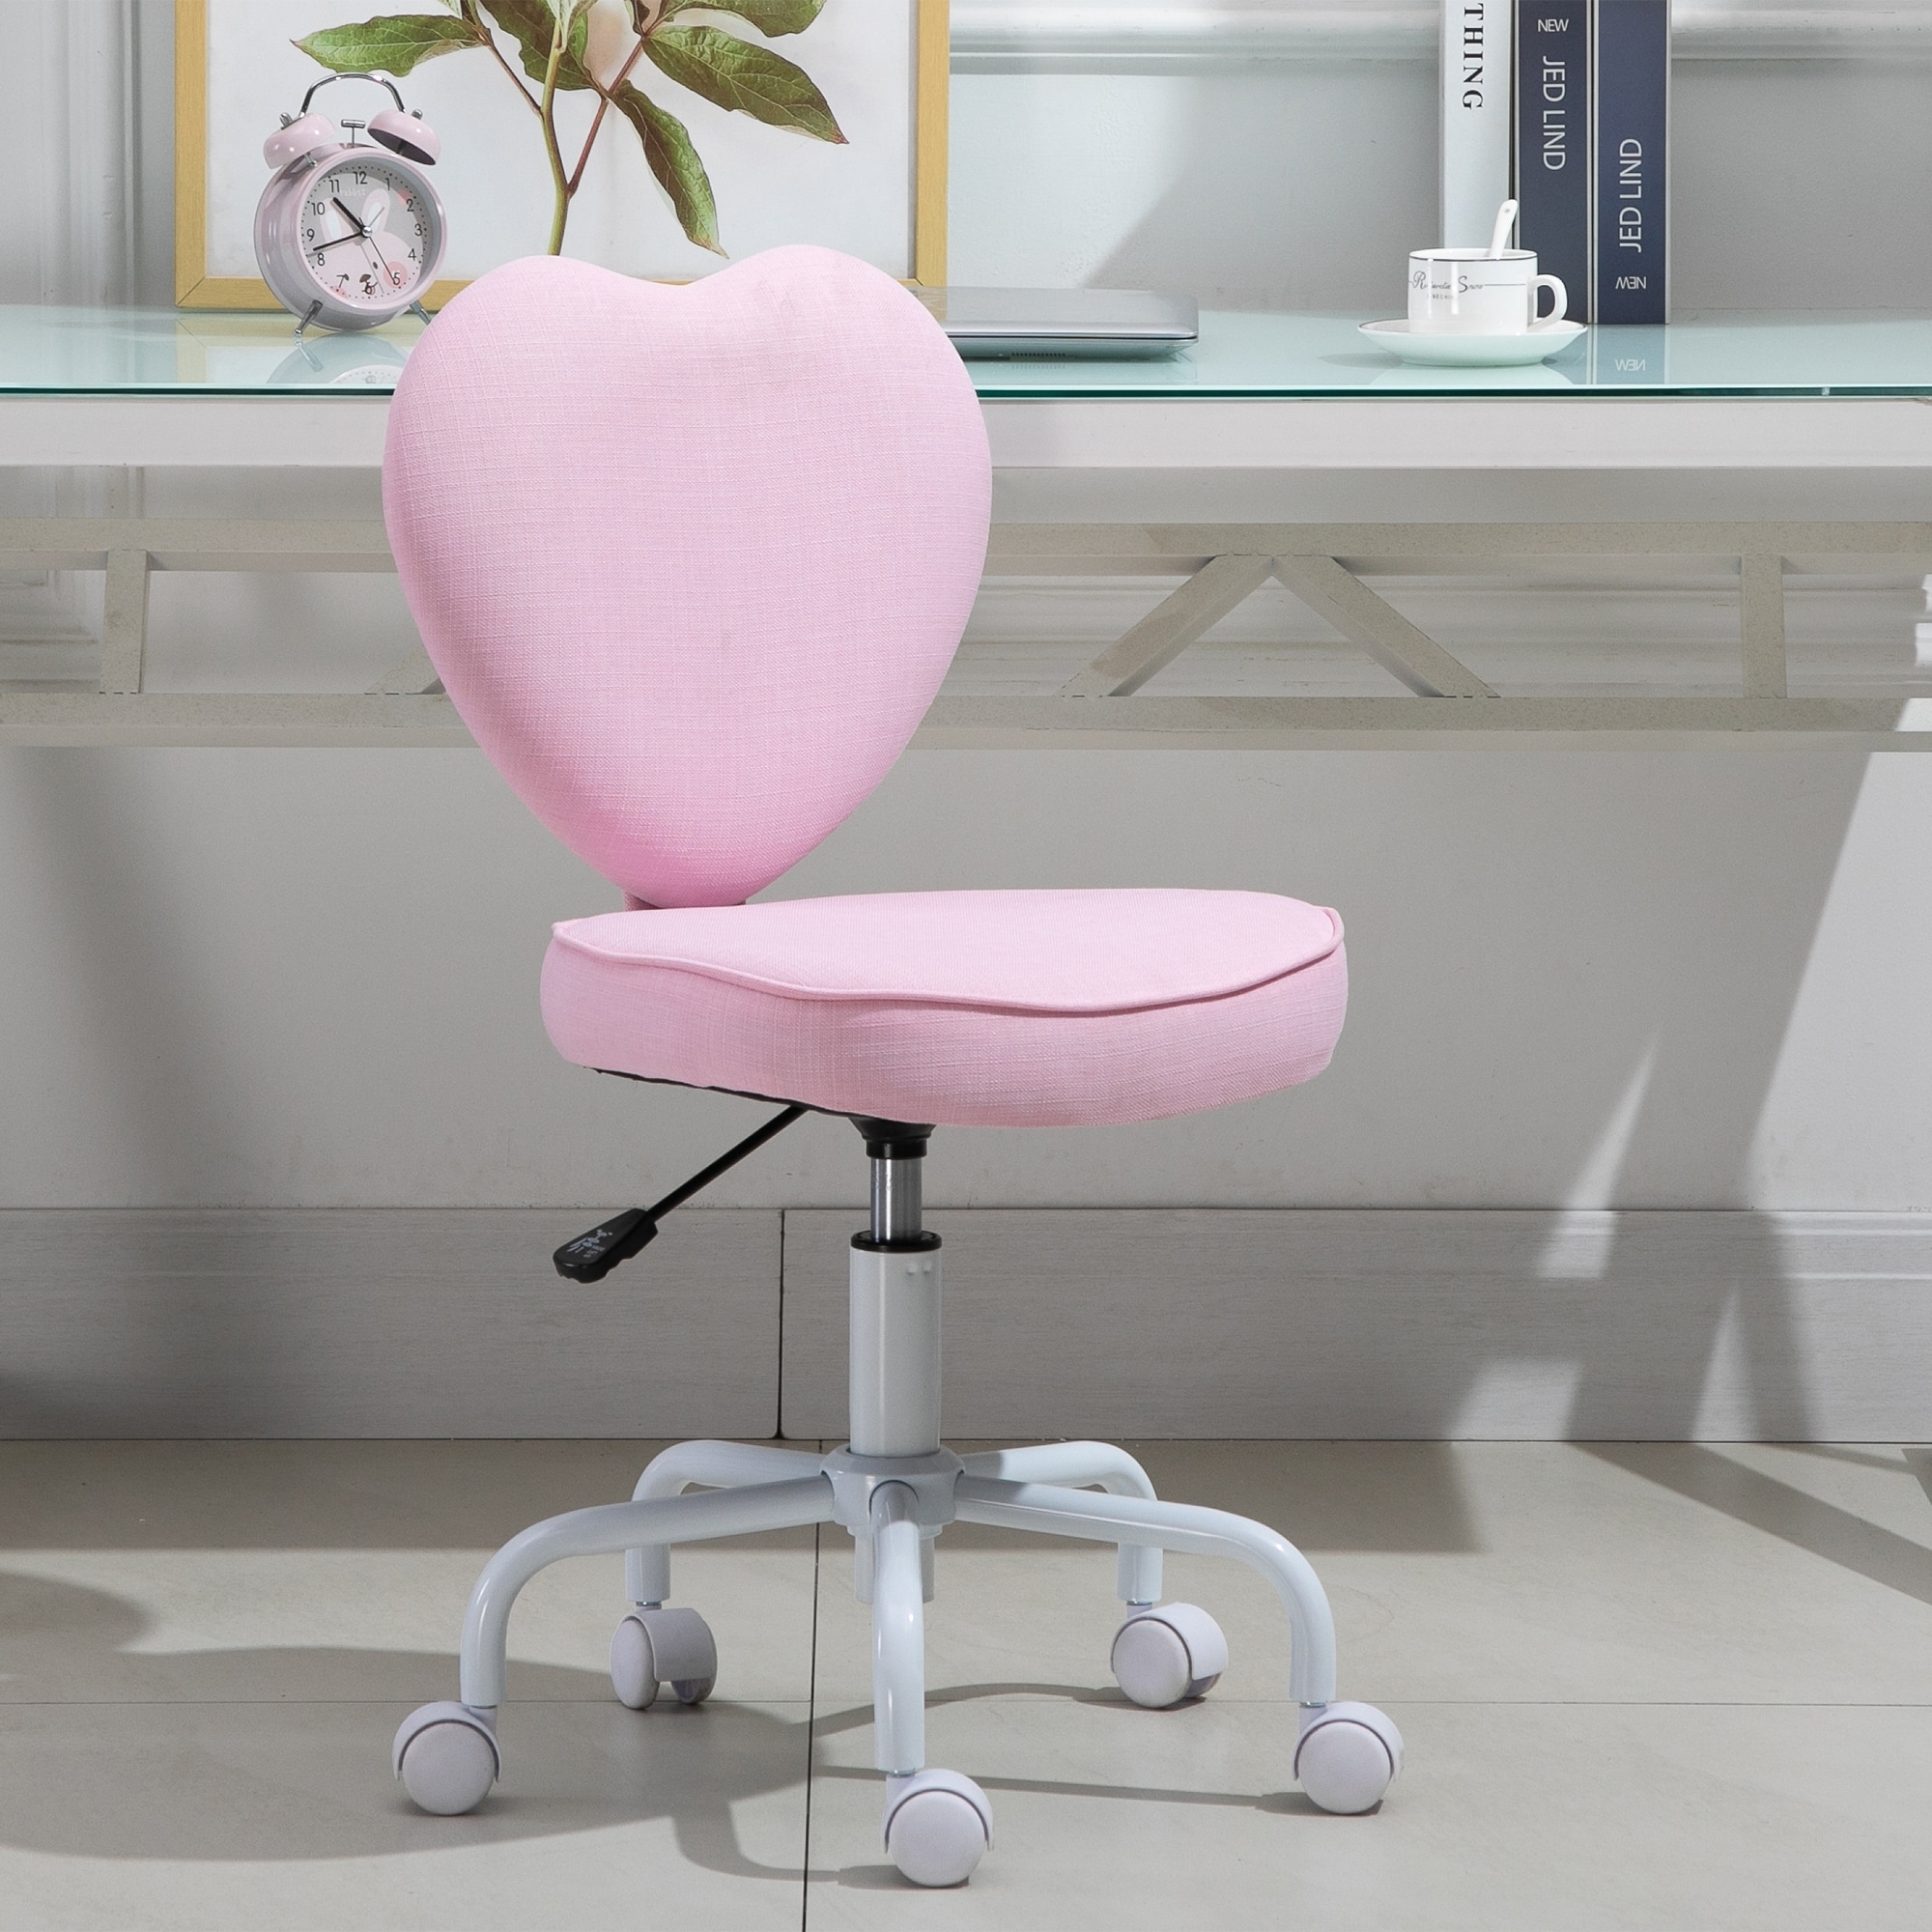 https://ak1.ostkcdn.com/images/products/is/images/direct/68533d5d1055d998d3d2763a60eacf33b573013d/HOMCOM-Heart-Love-Shaped-Back-Design-Office-Chair-with-Adjustable-Height-and-360-Swivel-Castor-Wheels%2C-Pink.jpg